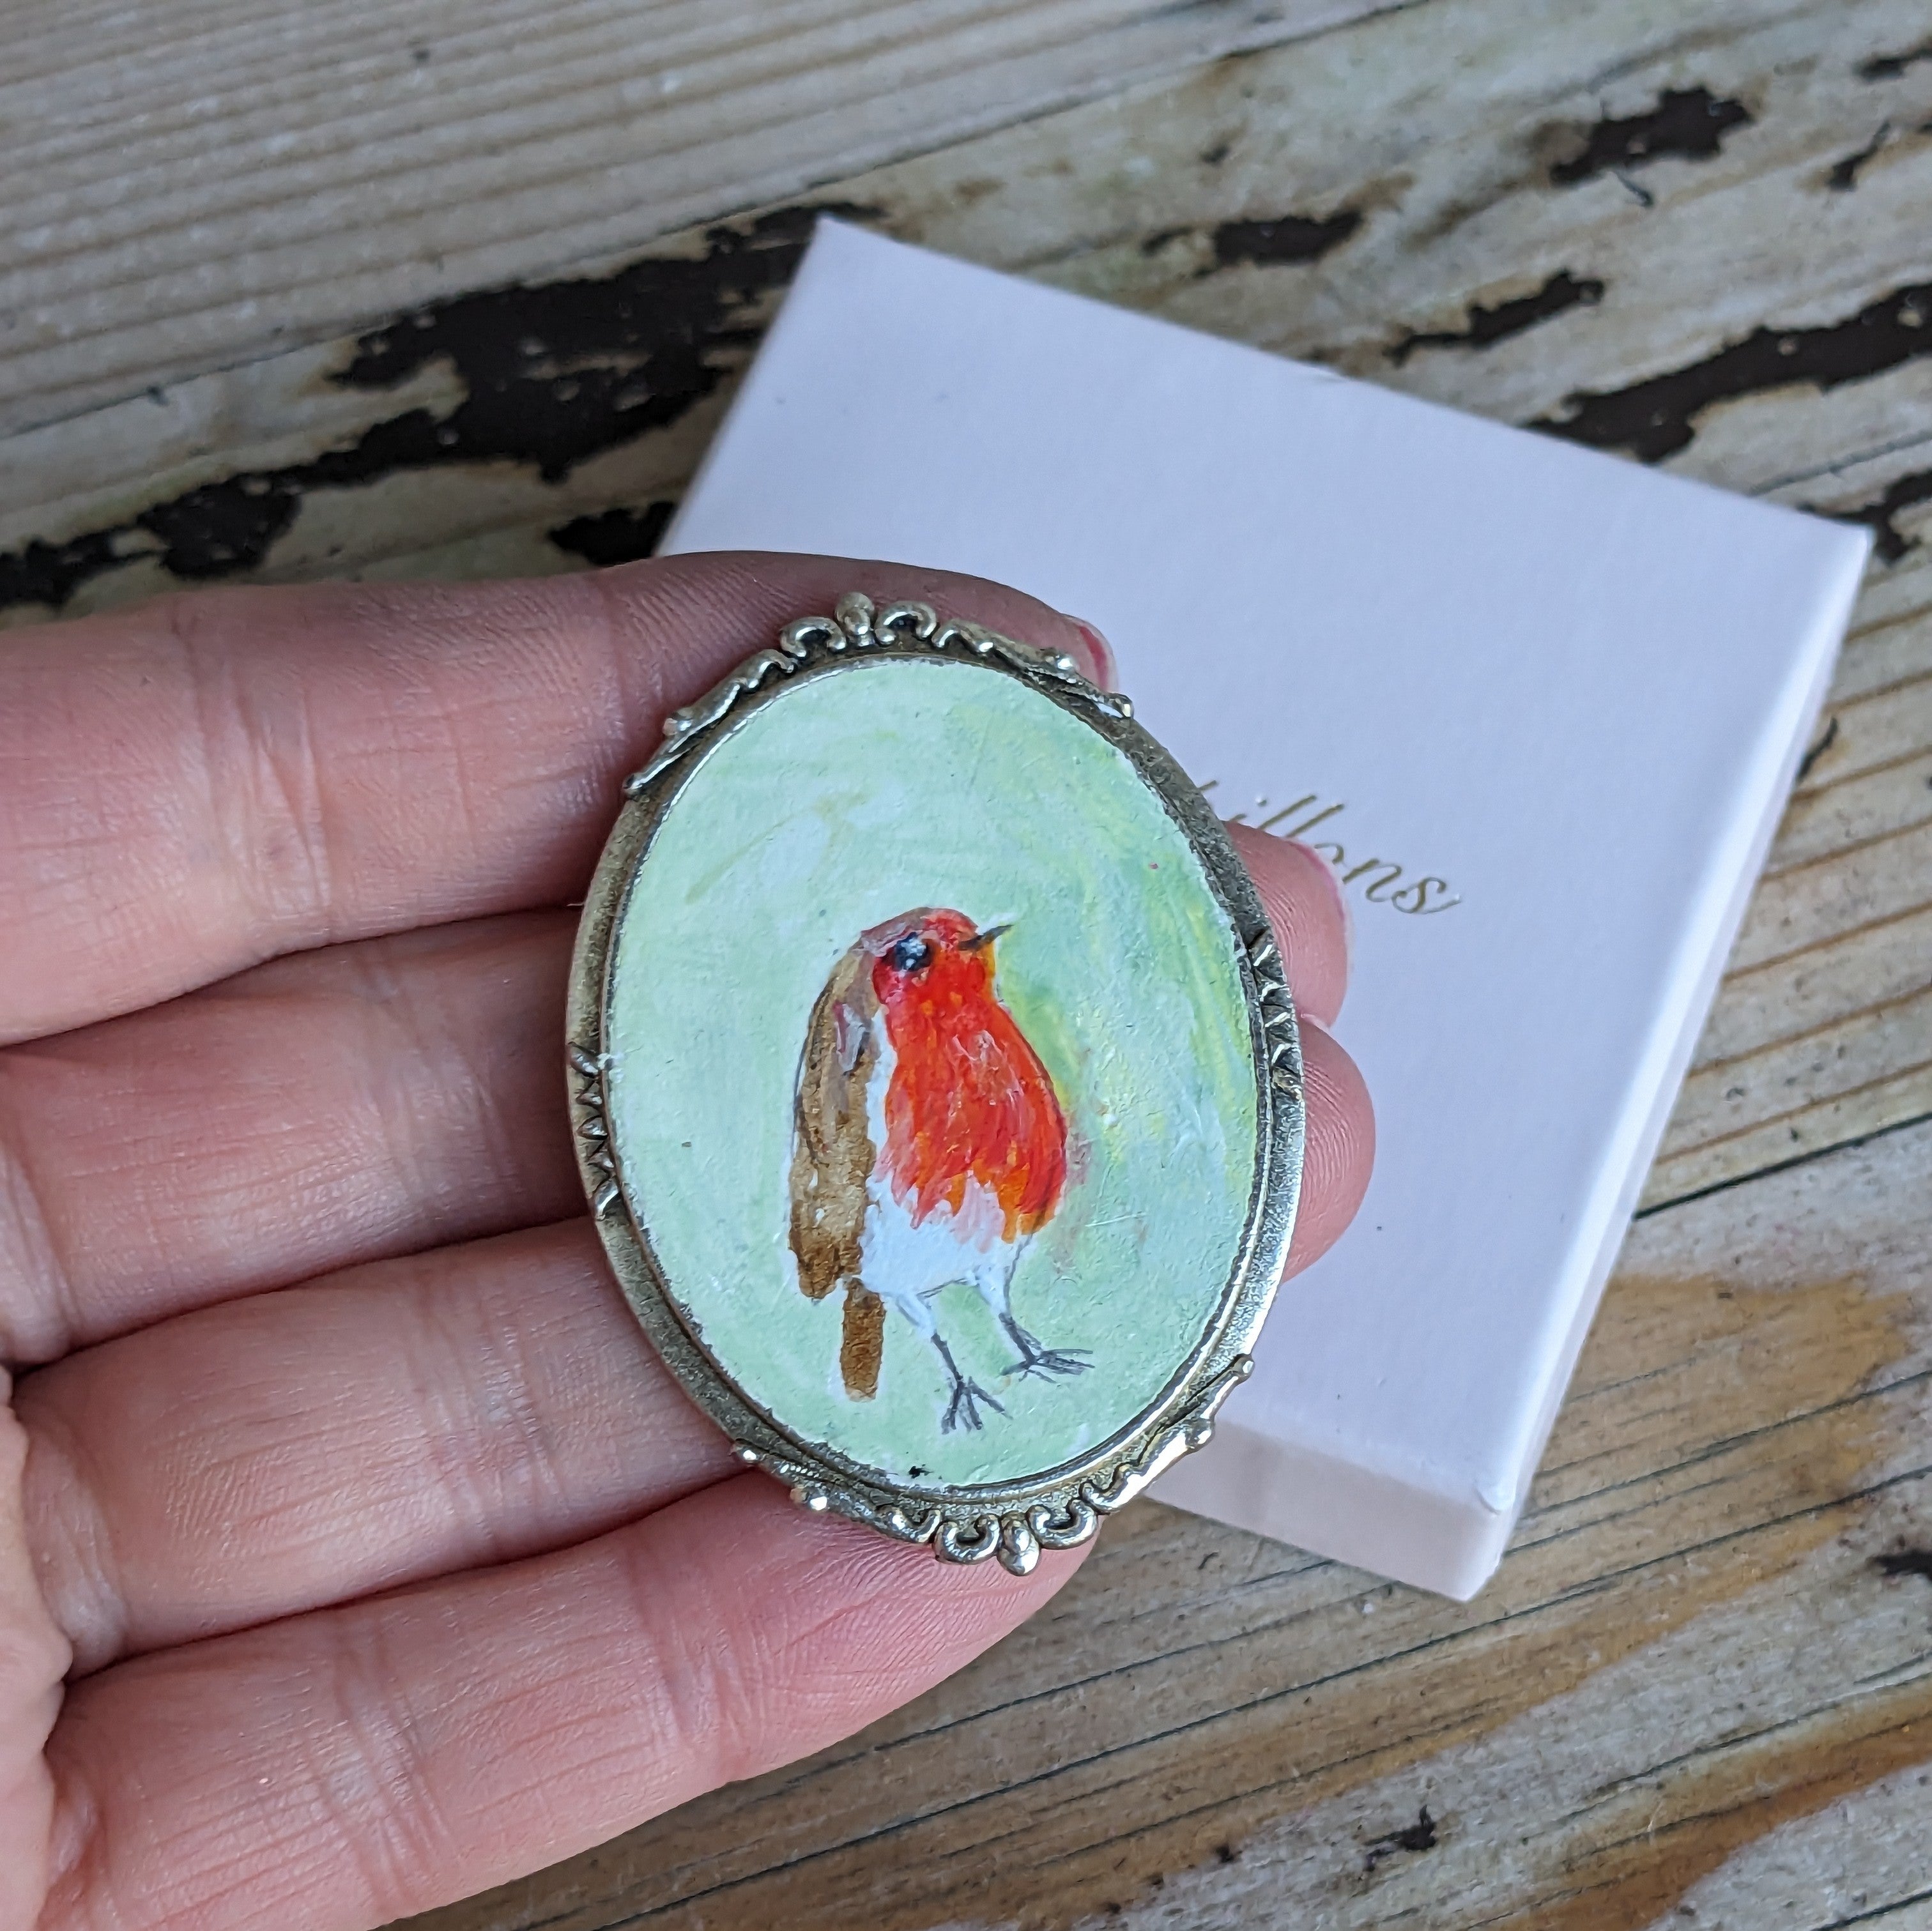 Messenger of sollace, a painted robin brooch